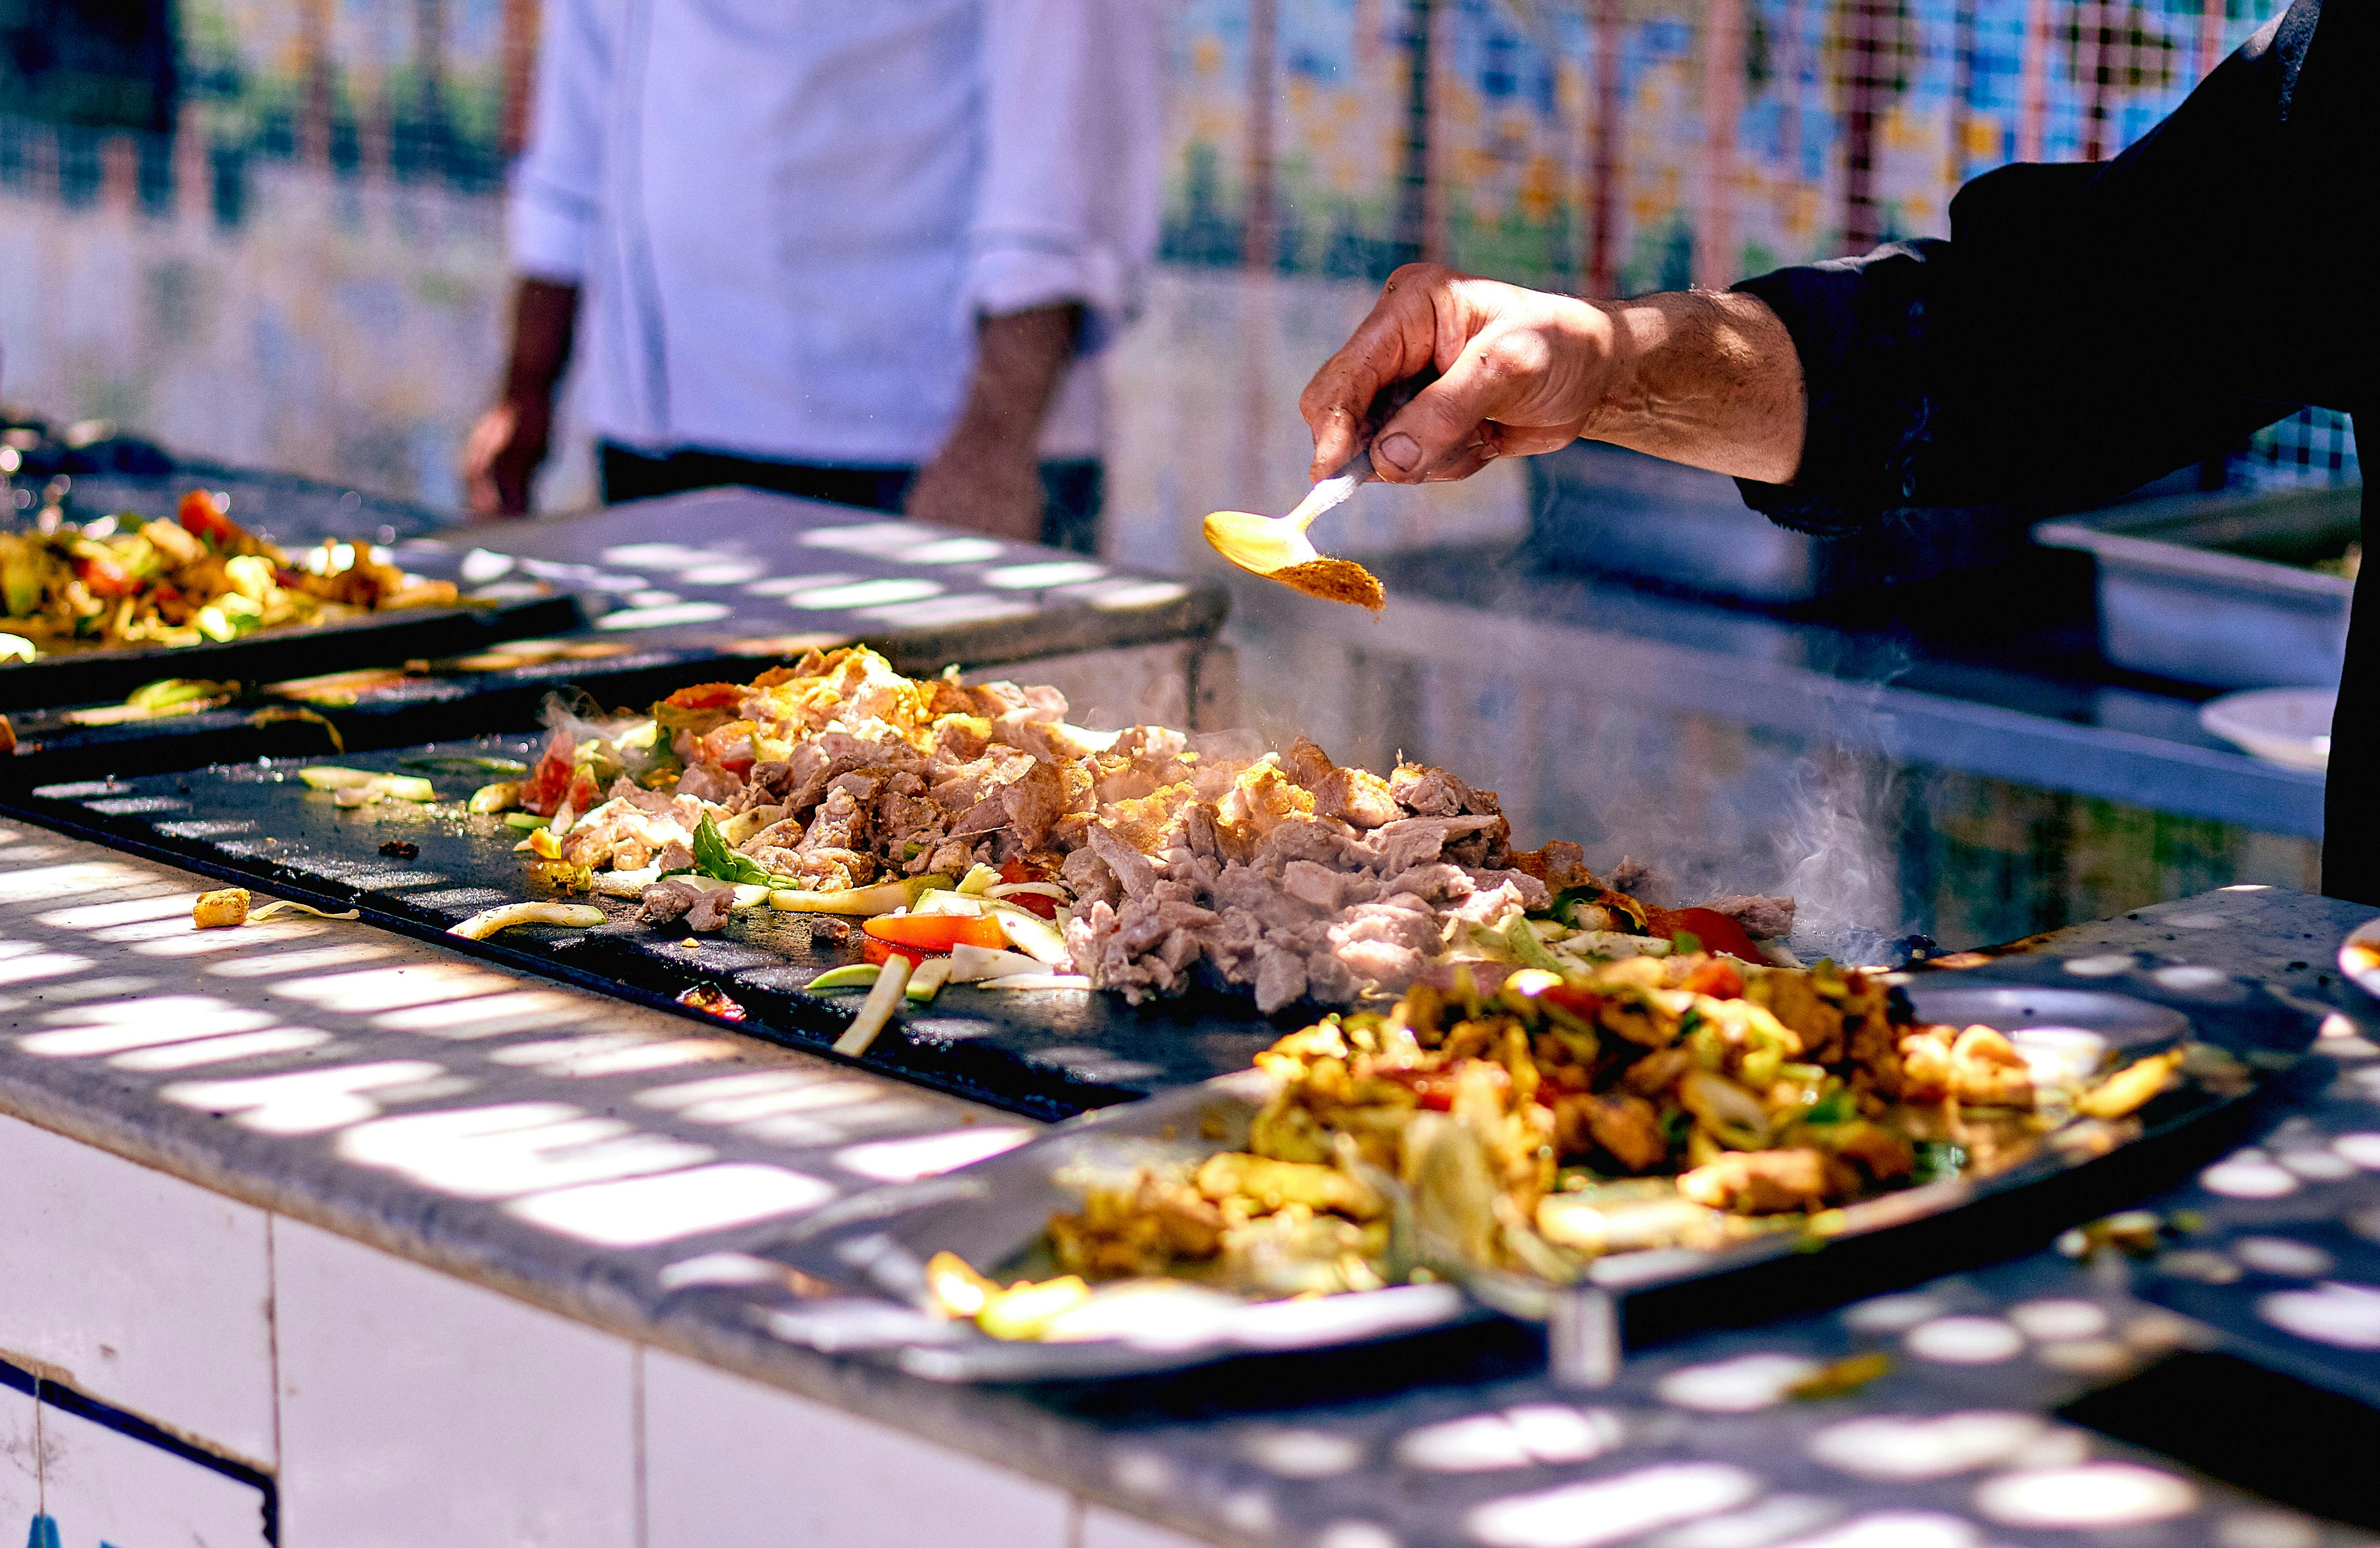 Foods Served on the Street